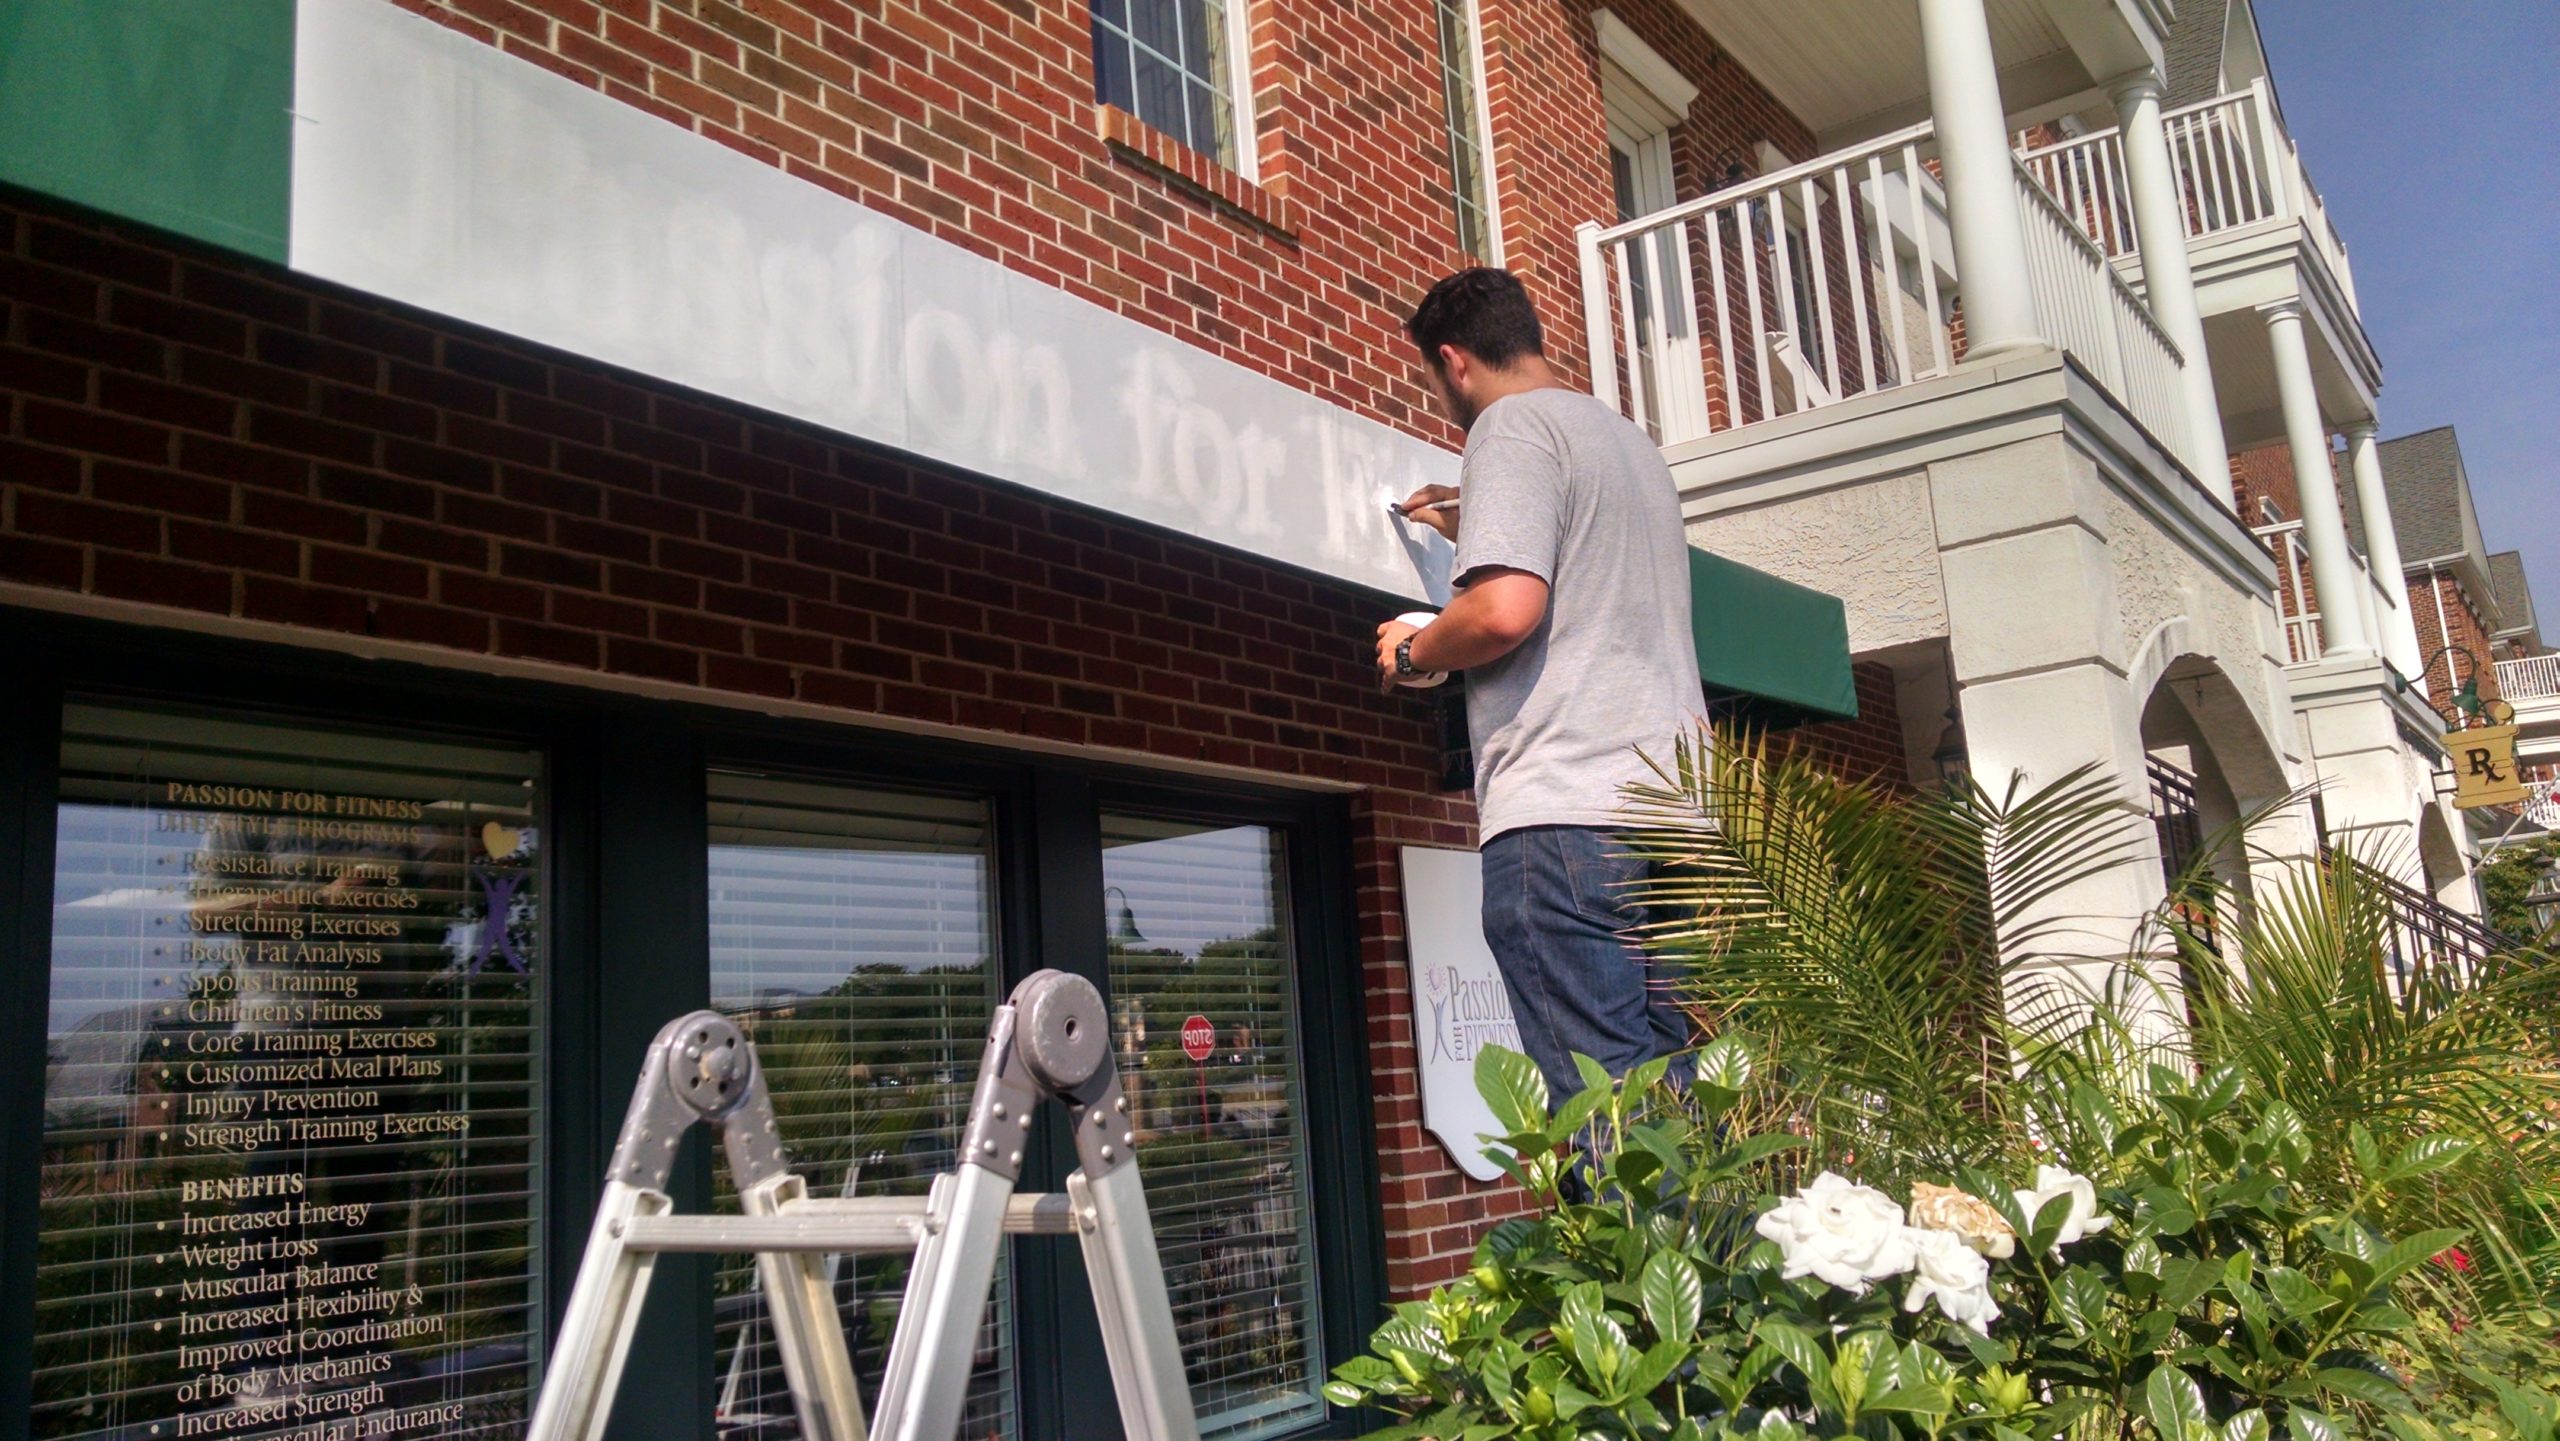 applying letters to awning